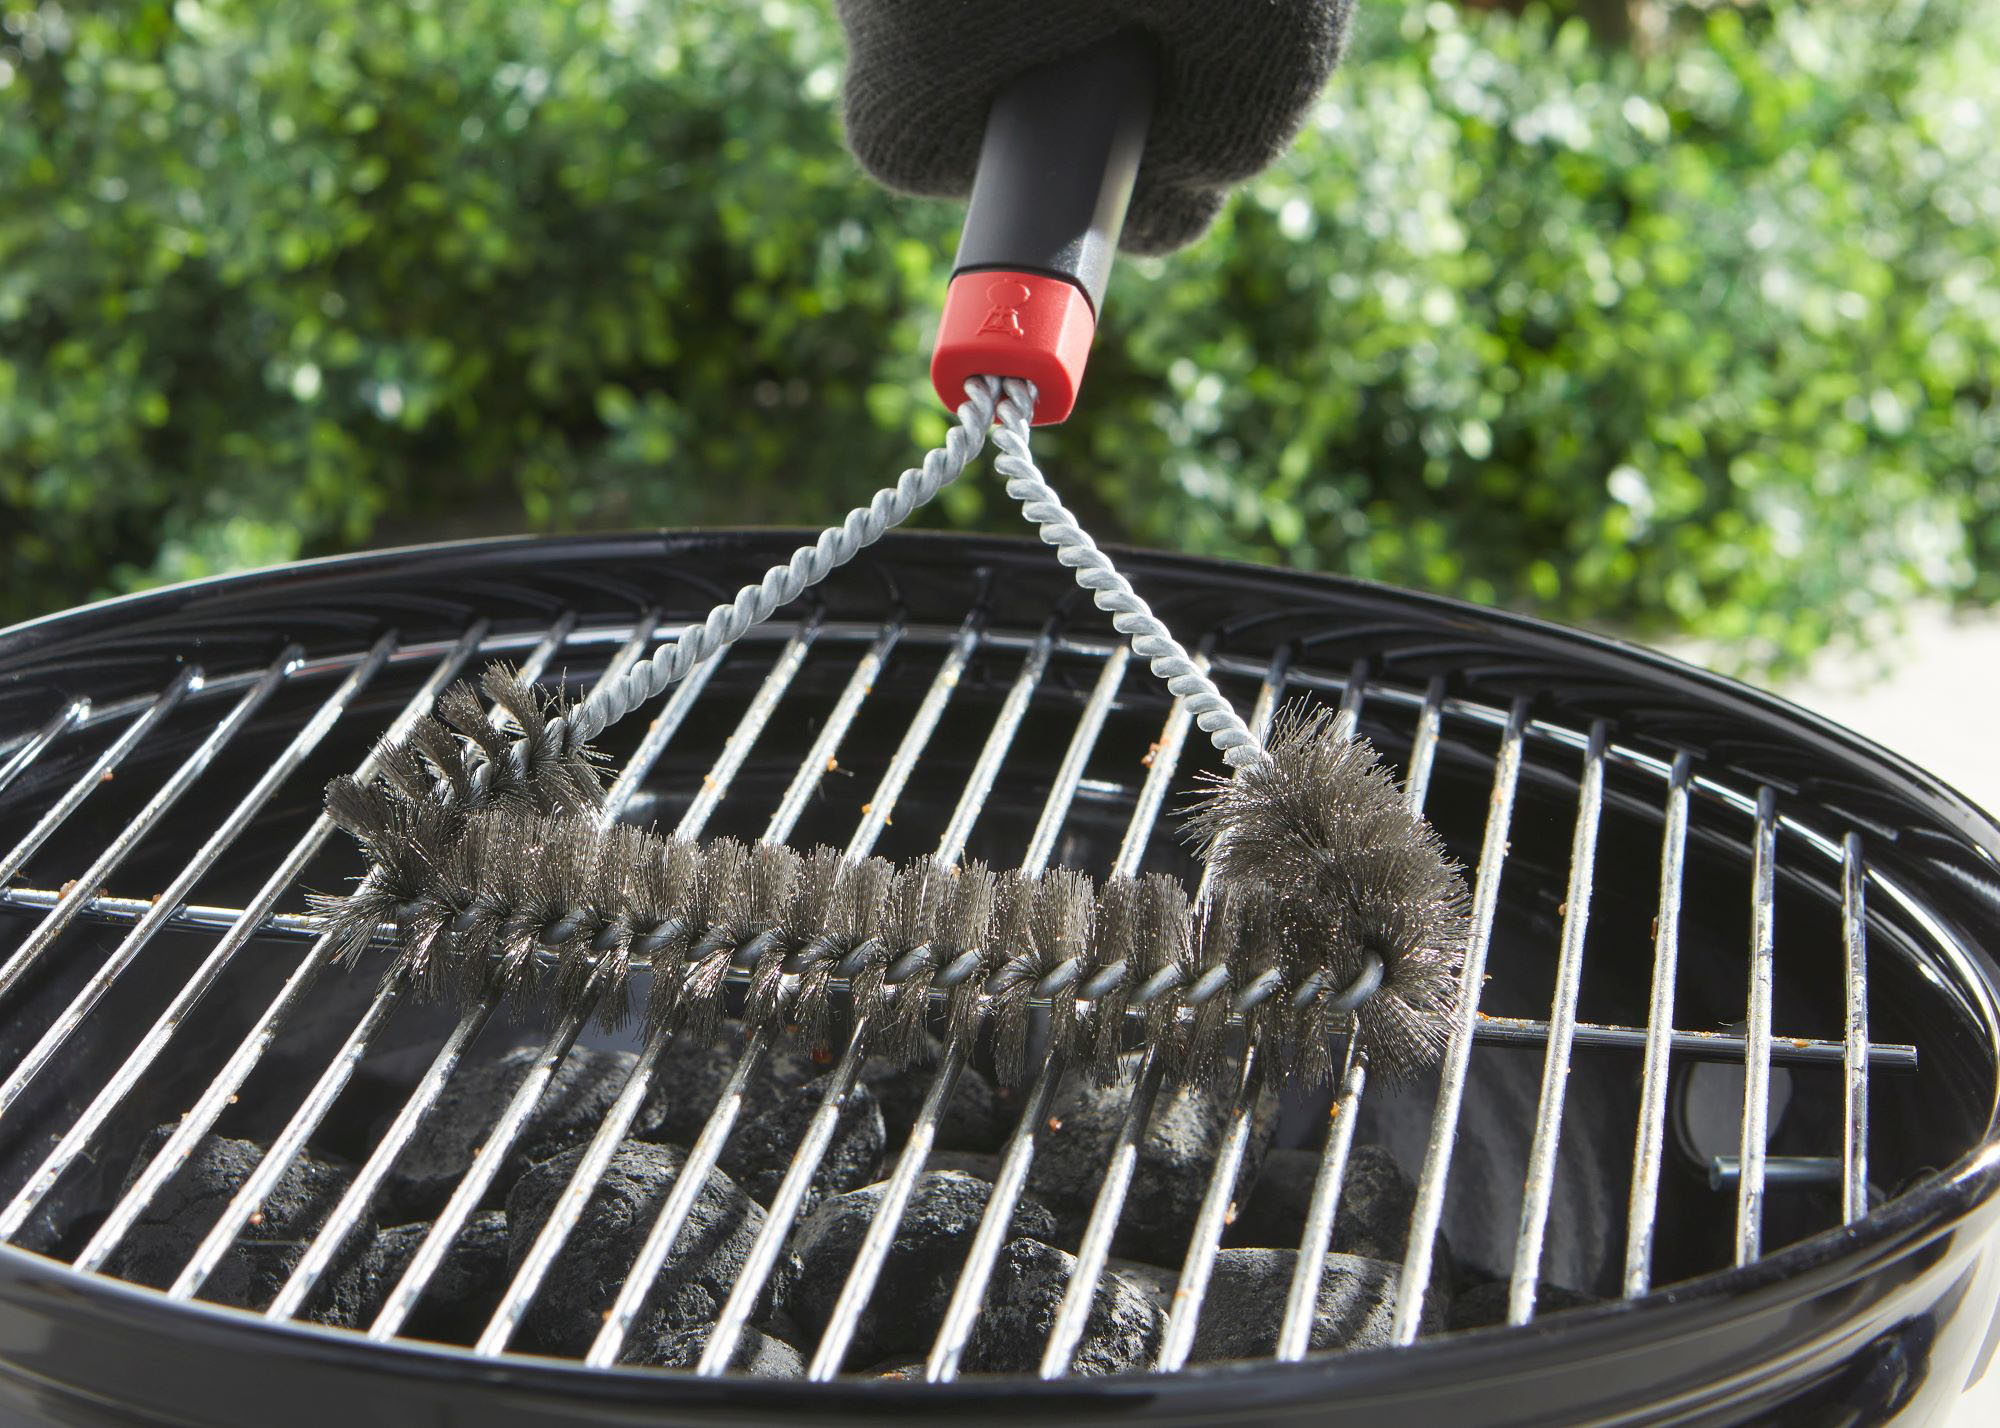 Weber Three-Sided Grill Brush 12 in